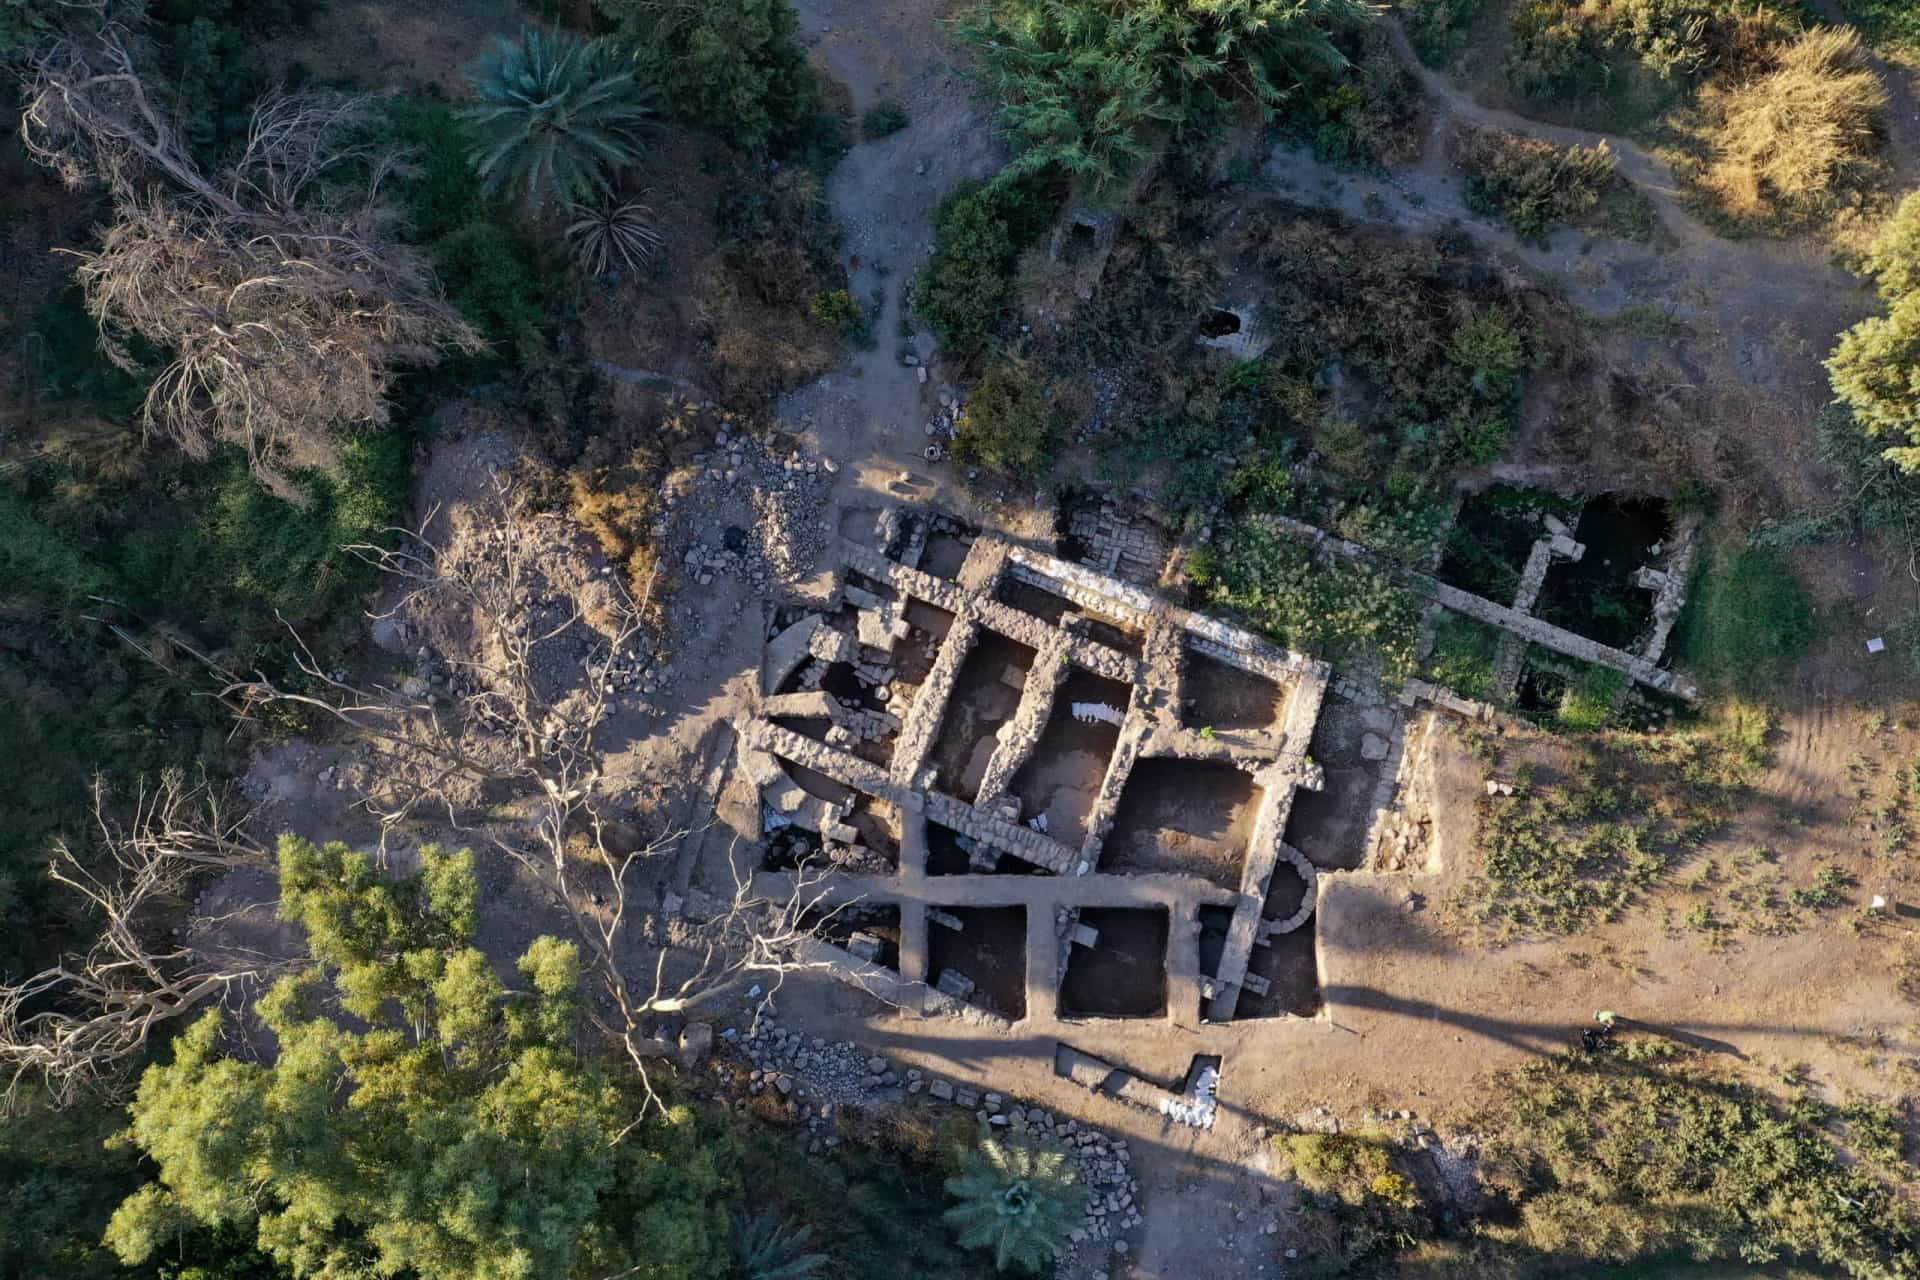 <p>This is the archaeological site believed to be the place of Bethsaida, on the northern shore of the Sea of Galilee, which was home to Saint Peter. The village saw Jesus perform several memorable miracles. Bethsaida was also the biblical Roman city of Julias.</p>